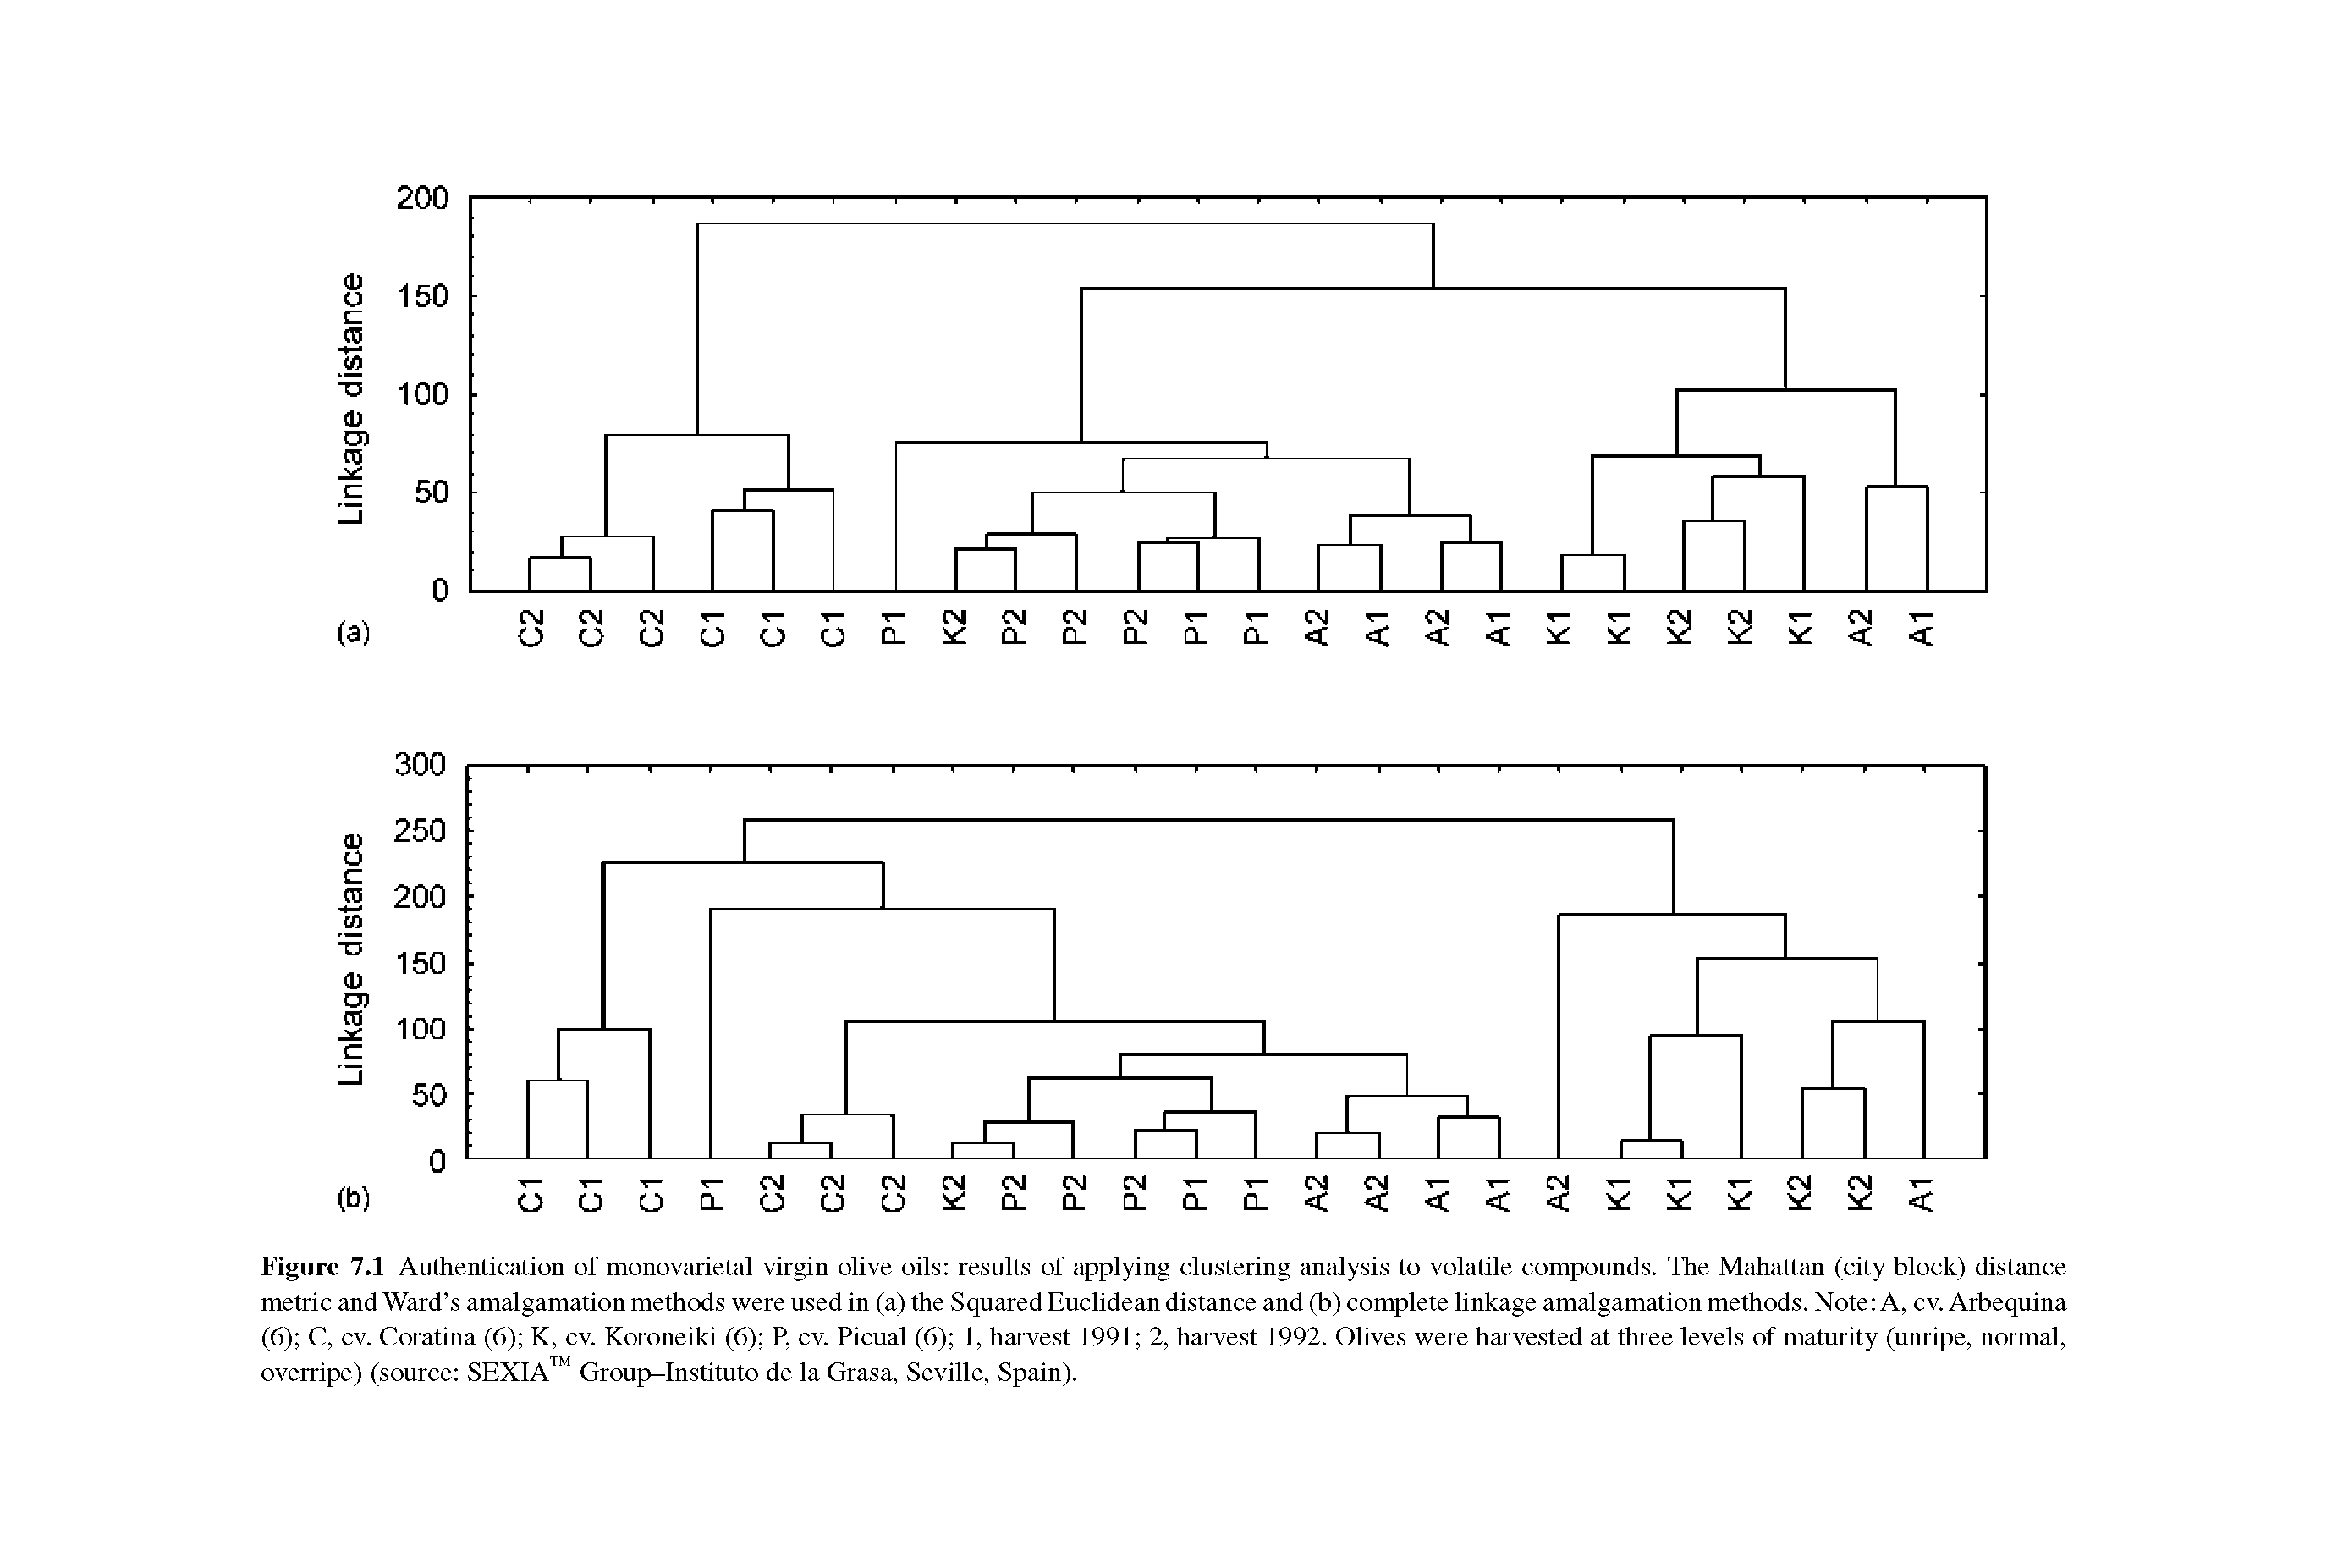 Figure 7.1 Authentication of monovarietal virgin olive oils results of applying clustering analysis to volatile compounds. The Mahattan (city block) distance metric and Ward s amalgamation methods were used in (a) the Squared Euclidean distance and (b) complete linkage amalgamation methods. Note A, cv. Arbequina (6) C, cv. Coratina (6) K, cv. Koroneiki (6) P, cv. Picual (6) 1, harvest 1991 2, harvest 1992. Olives were harvested at three levels of maturity (unripe, normal, overripe) (source SEXIA Group-Instituto de la Grasa, Seville, Spain).